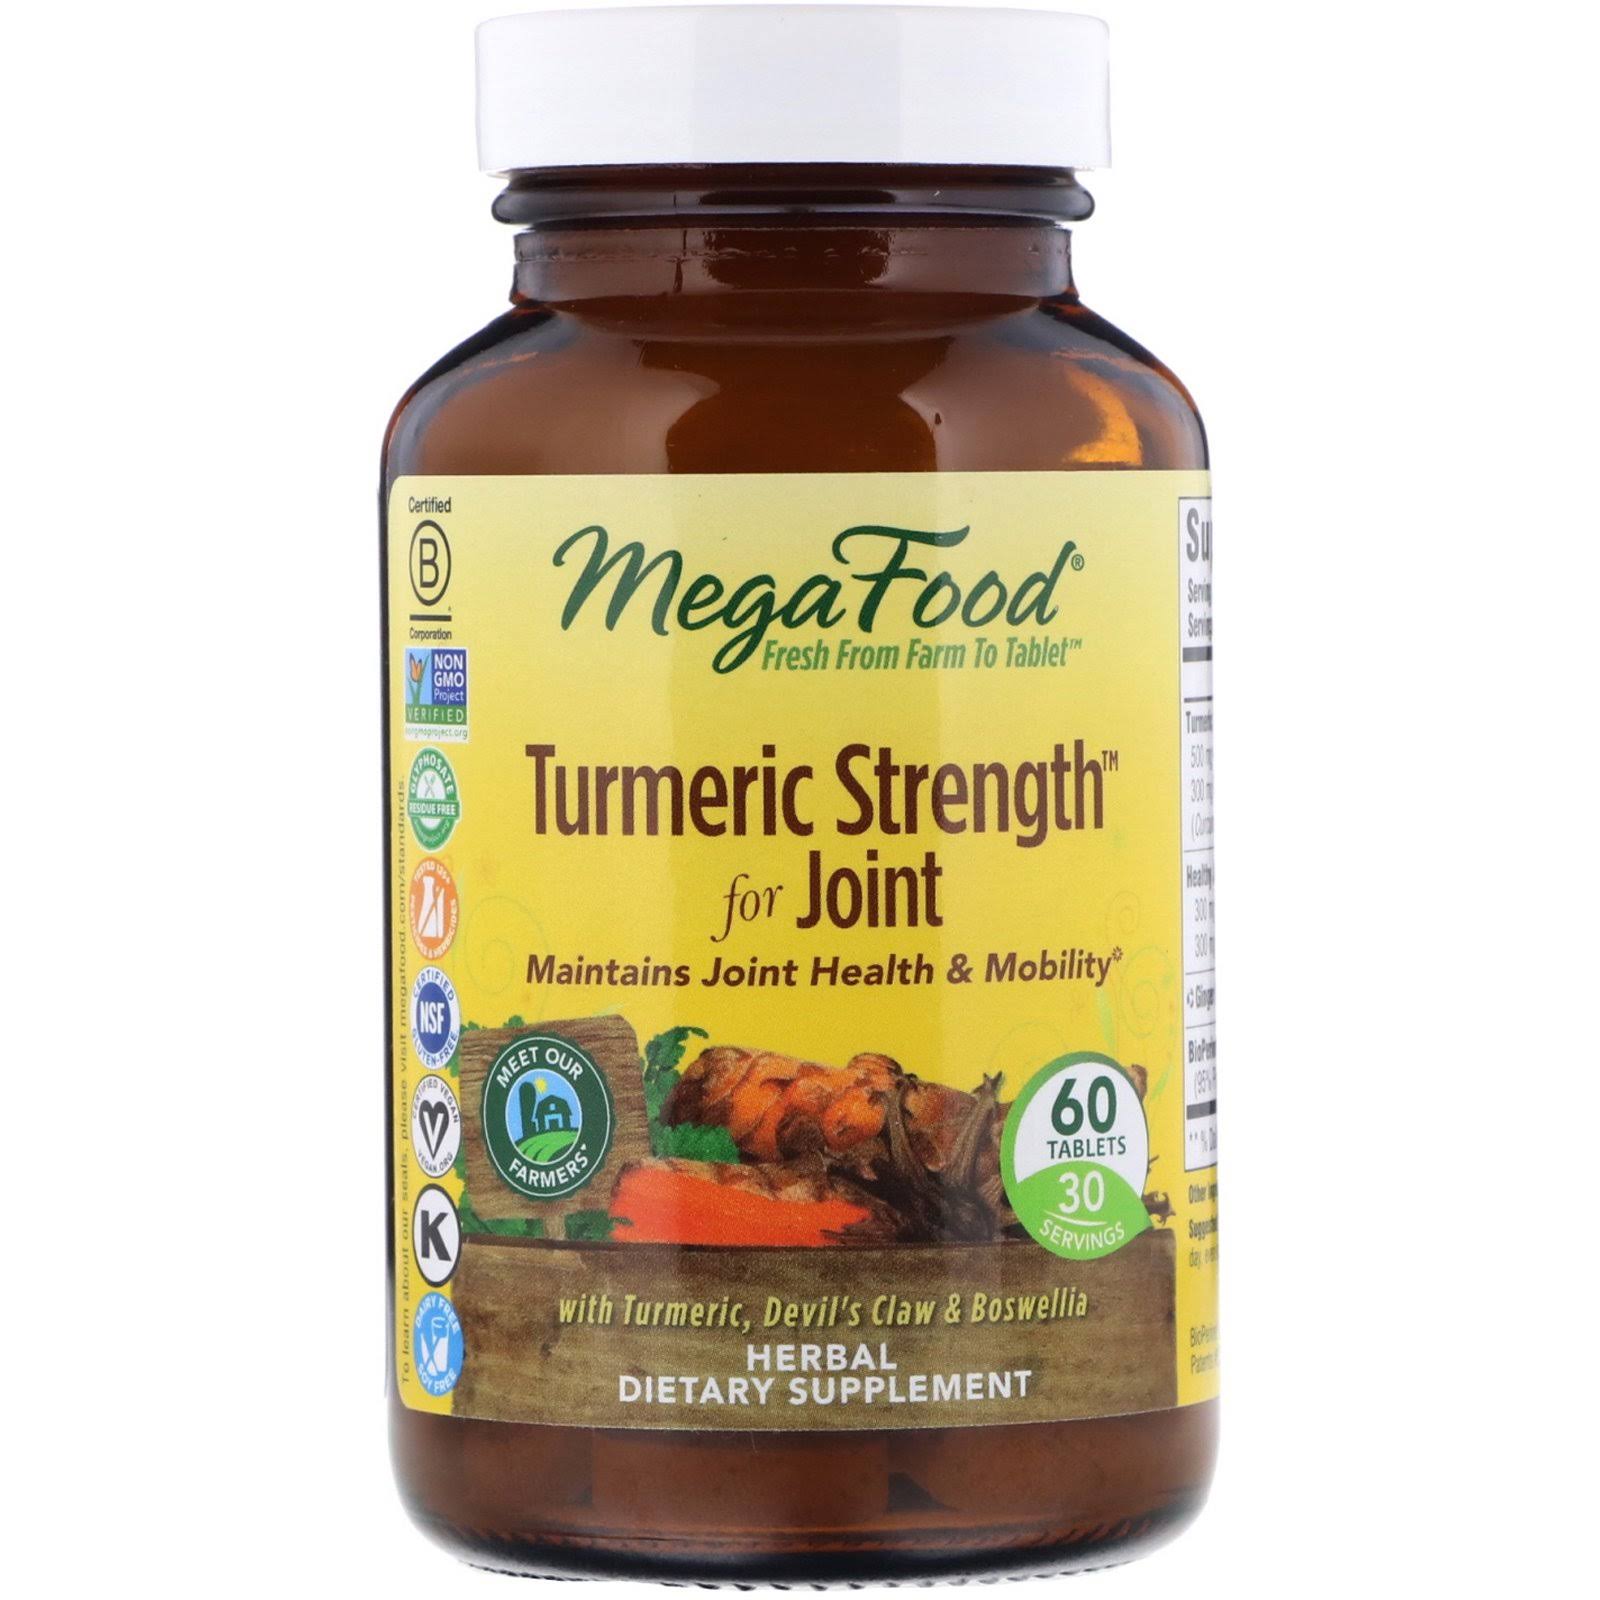 MegaFood Turmeric Strength for Joint Dietary Supplement - 60 Tablets